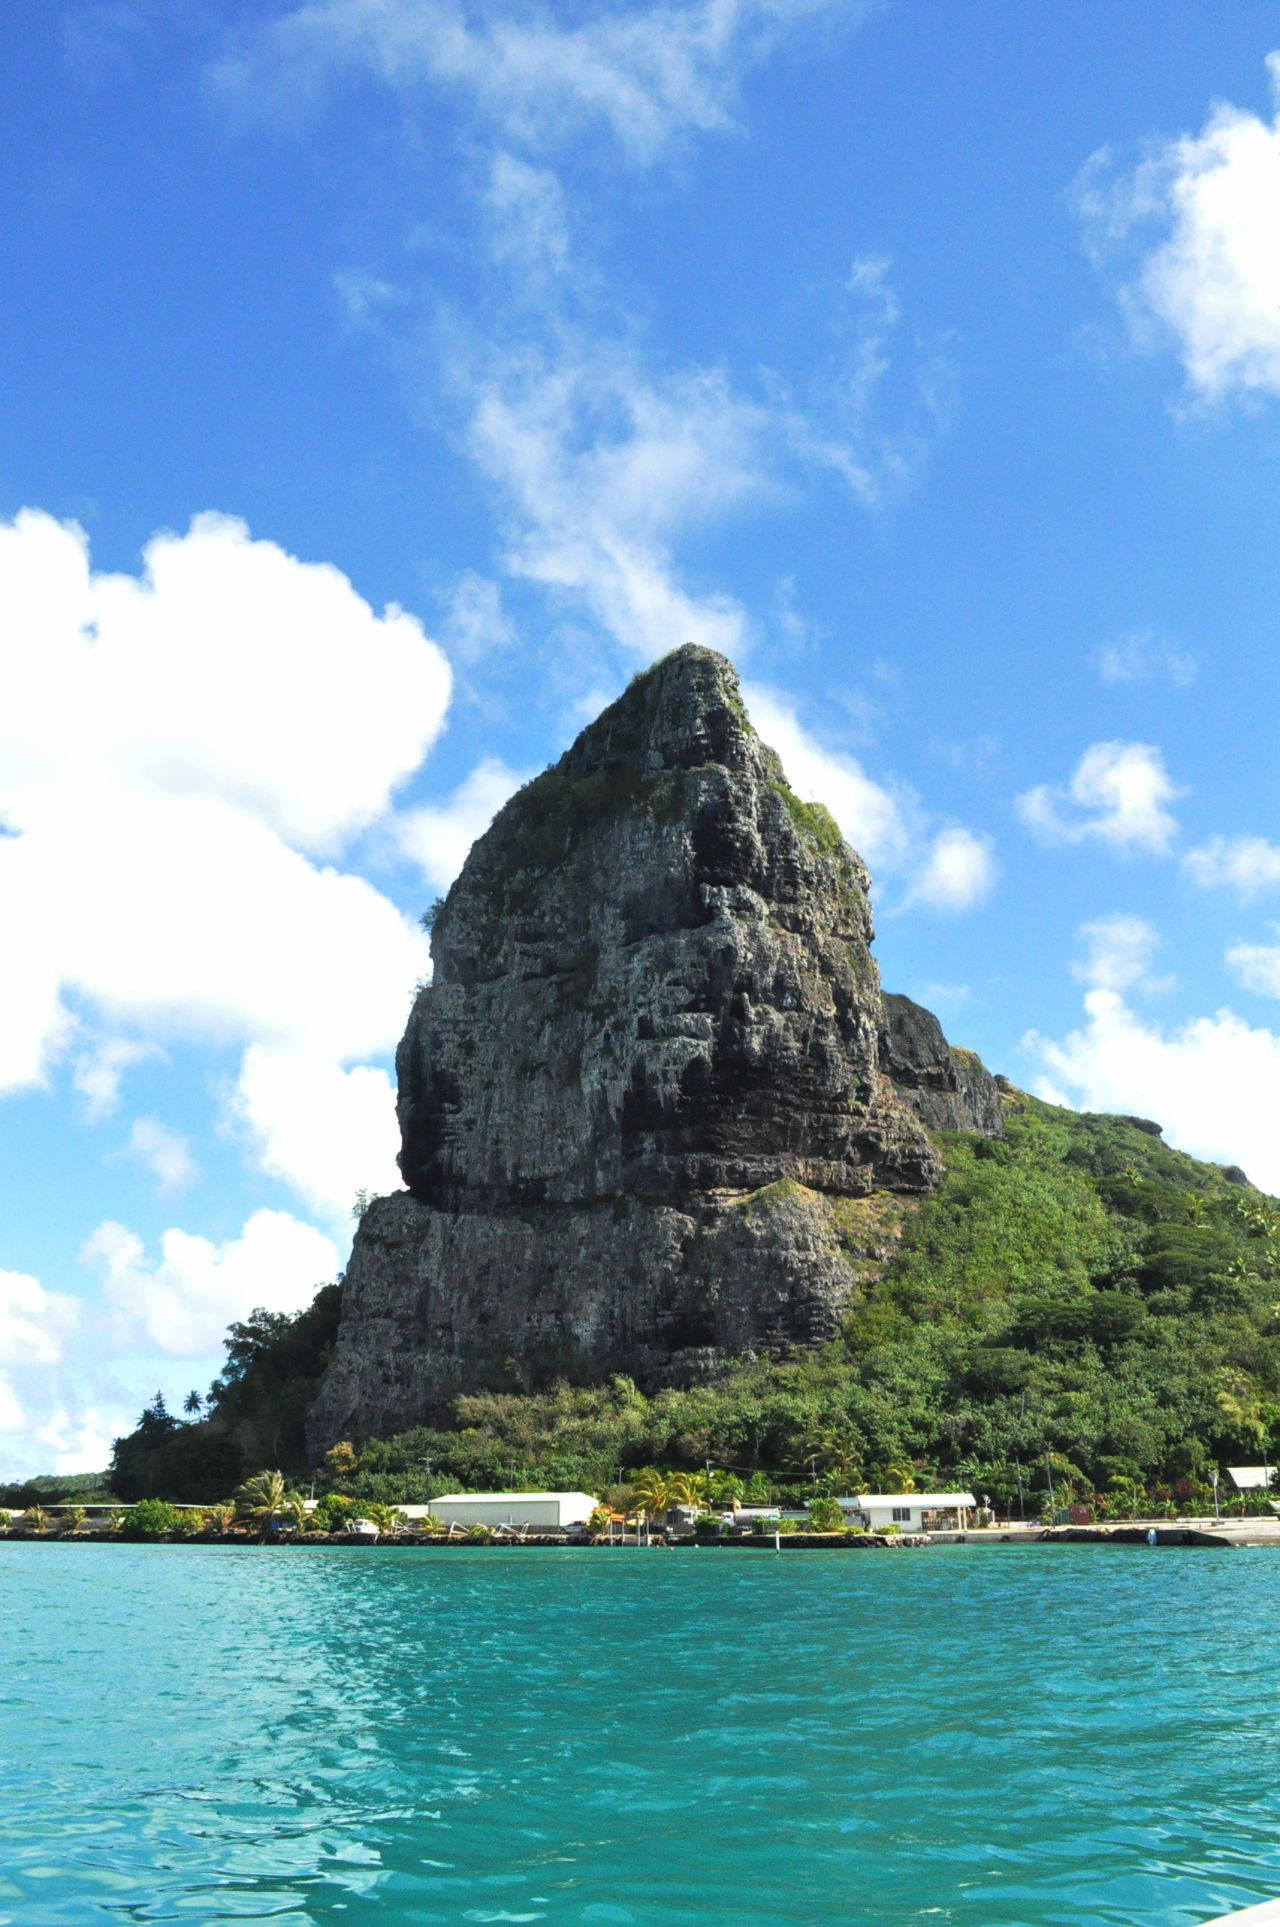 With its own high peaks, Maupiti is like a mini Bora Bora, without all the glitz. Its five islets are perfect for boat rides and beachside picnics. Mount Teurufaaitu is the highest point on the island, with incredible views of Raiatea, Bora Bora and Taha'a. 